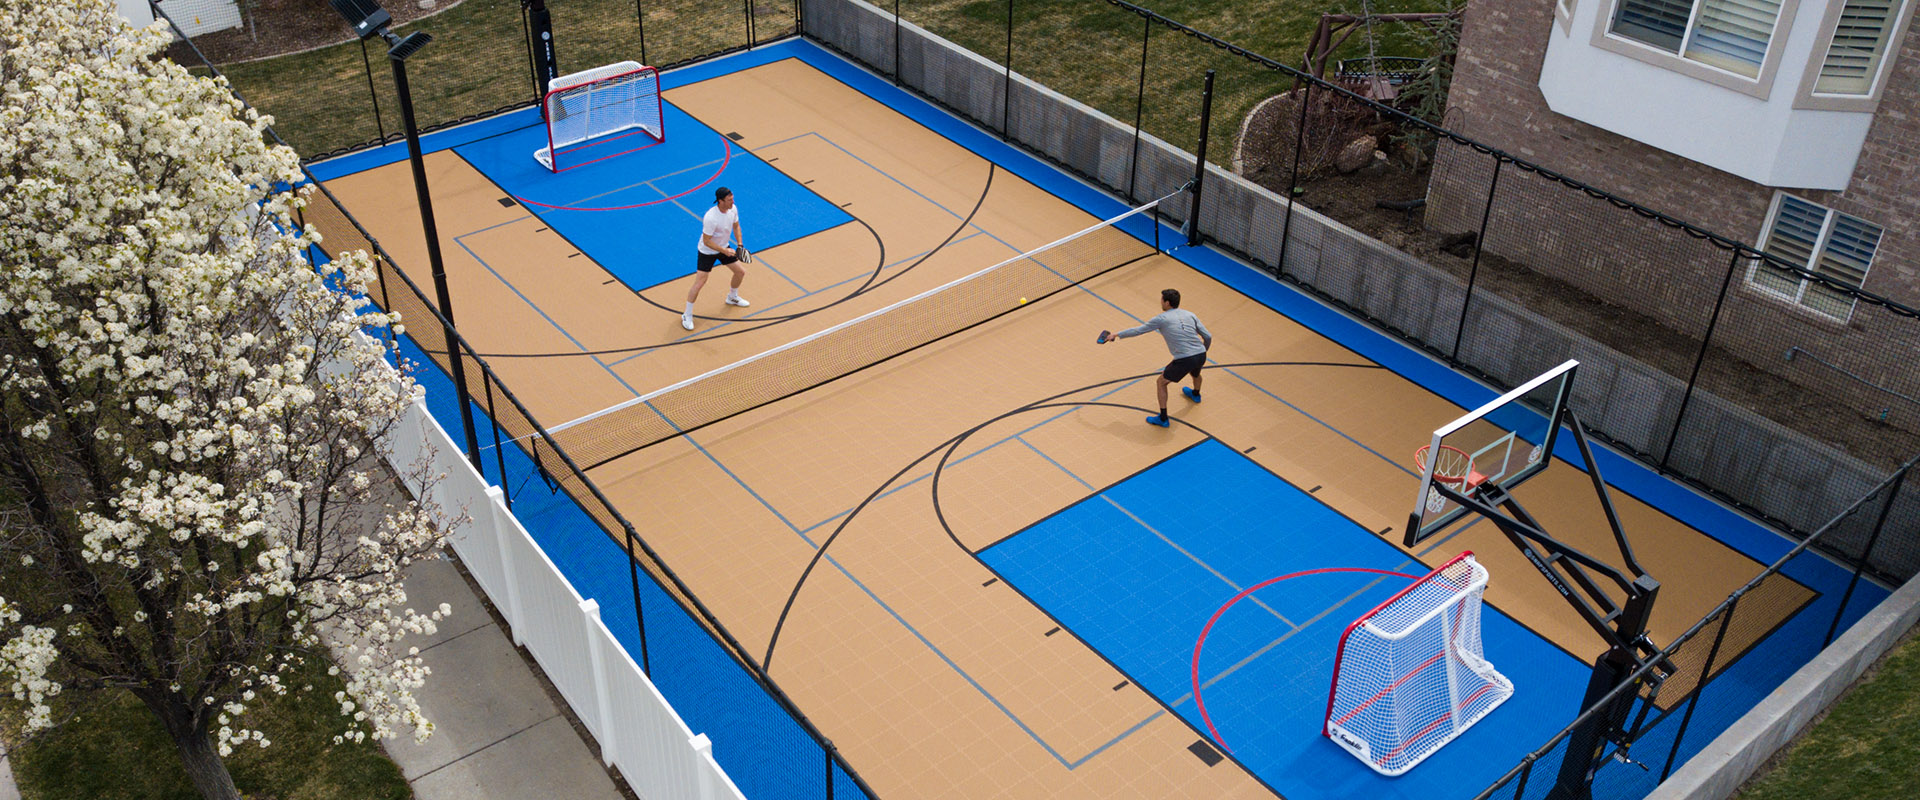 Basketball court surfaces with custom logo and colors to match NBA